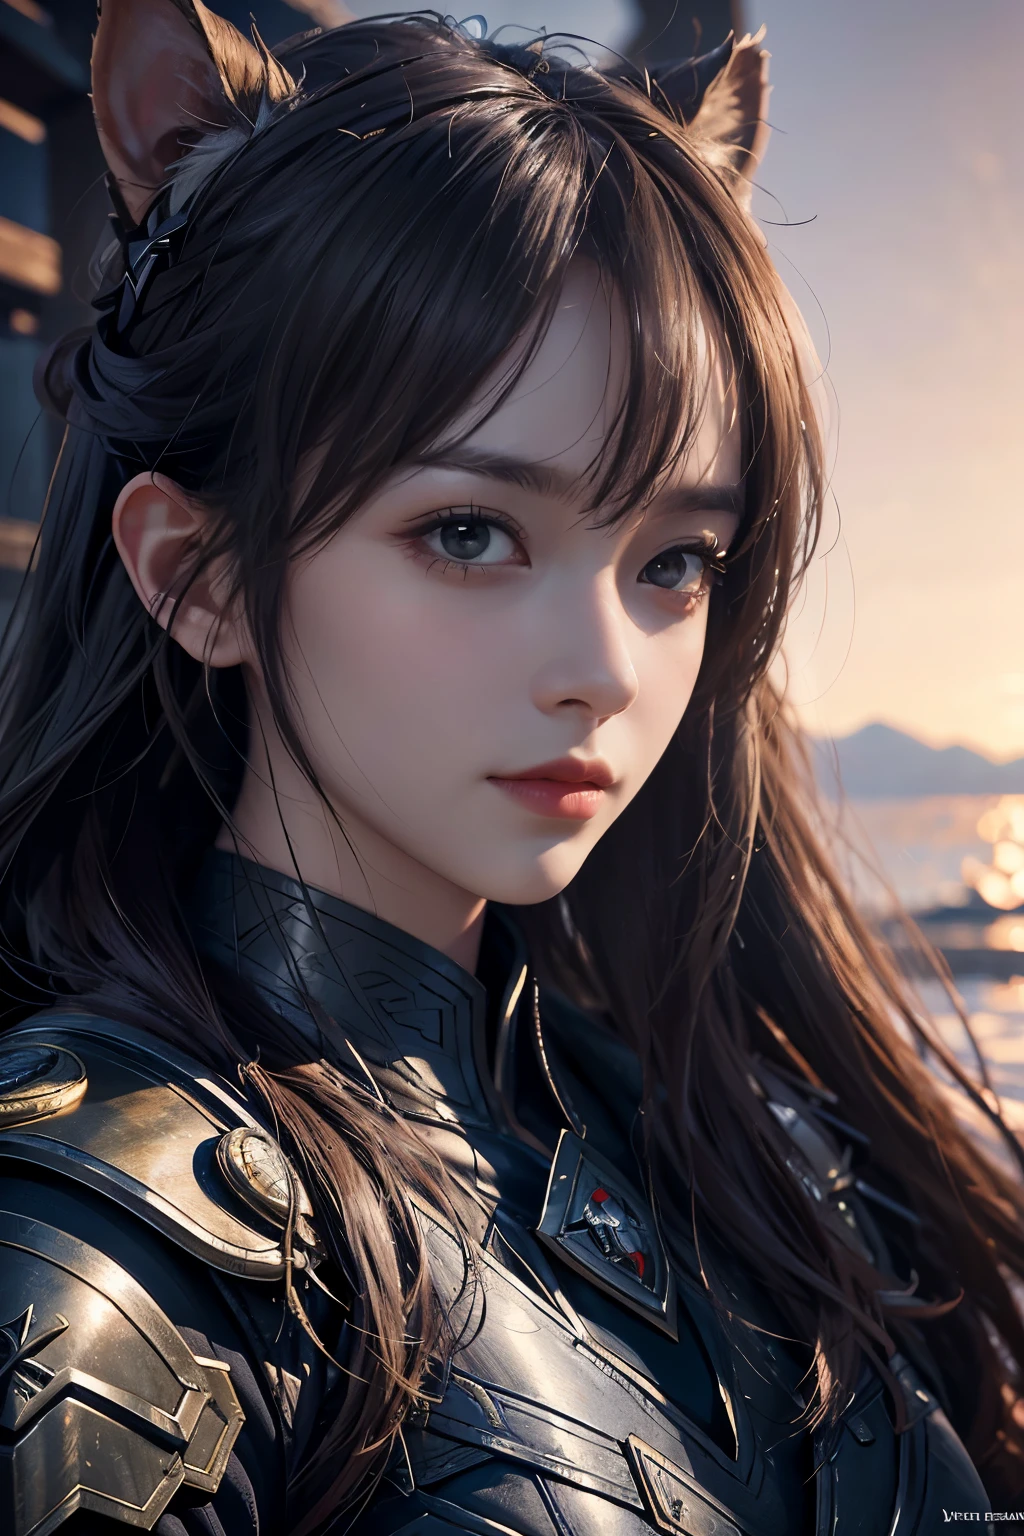 Game art，The best picture quality，Highest resolution，8K，(A bust photograph)，(Portrait)，(Head close-up:1.5)，(Rule of thirds)，Unreal Engine 5 rendering works， (The Girl of the Future)，(Female Warrior)， 
20-year-old girl，((Hunter))，An eye rich in detail，(Big breasts)，Elegant and noble，indifferent，brave，
（Medieval-style fur combat clothing，Glowing magic lines，Animal skin clothing with rich detailedieval Lady Knight，Medieval ranger，
Photo poses，Simple background，Movie lights，Ray tracing，Game CG，((3D Unreal Engine))，oc rendering reflection pattern